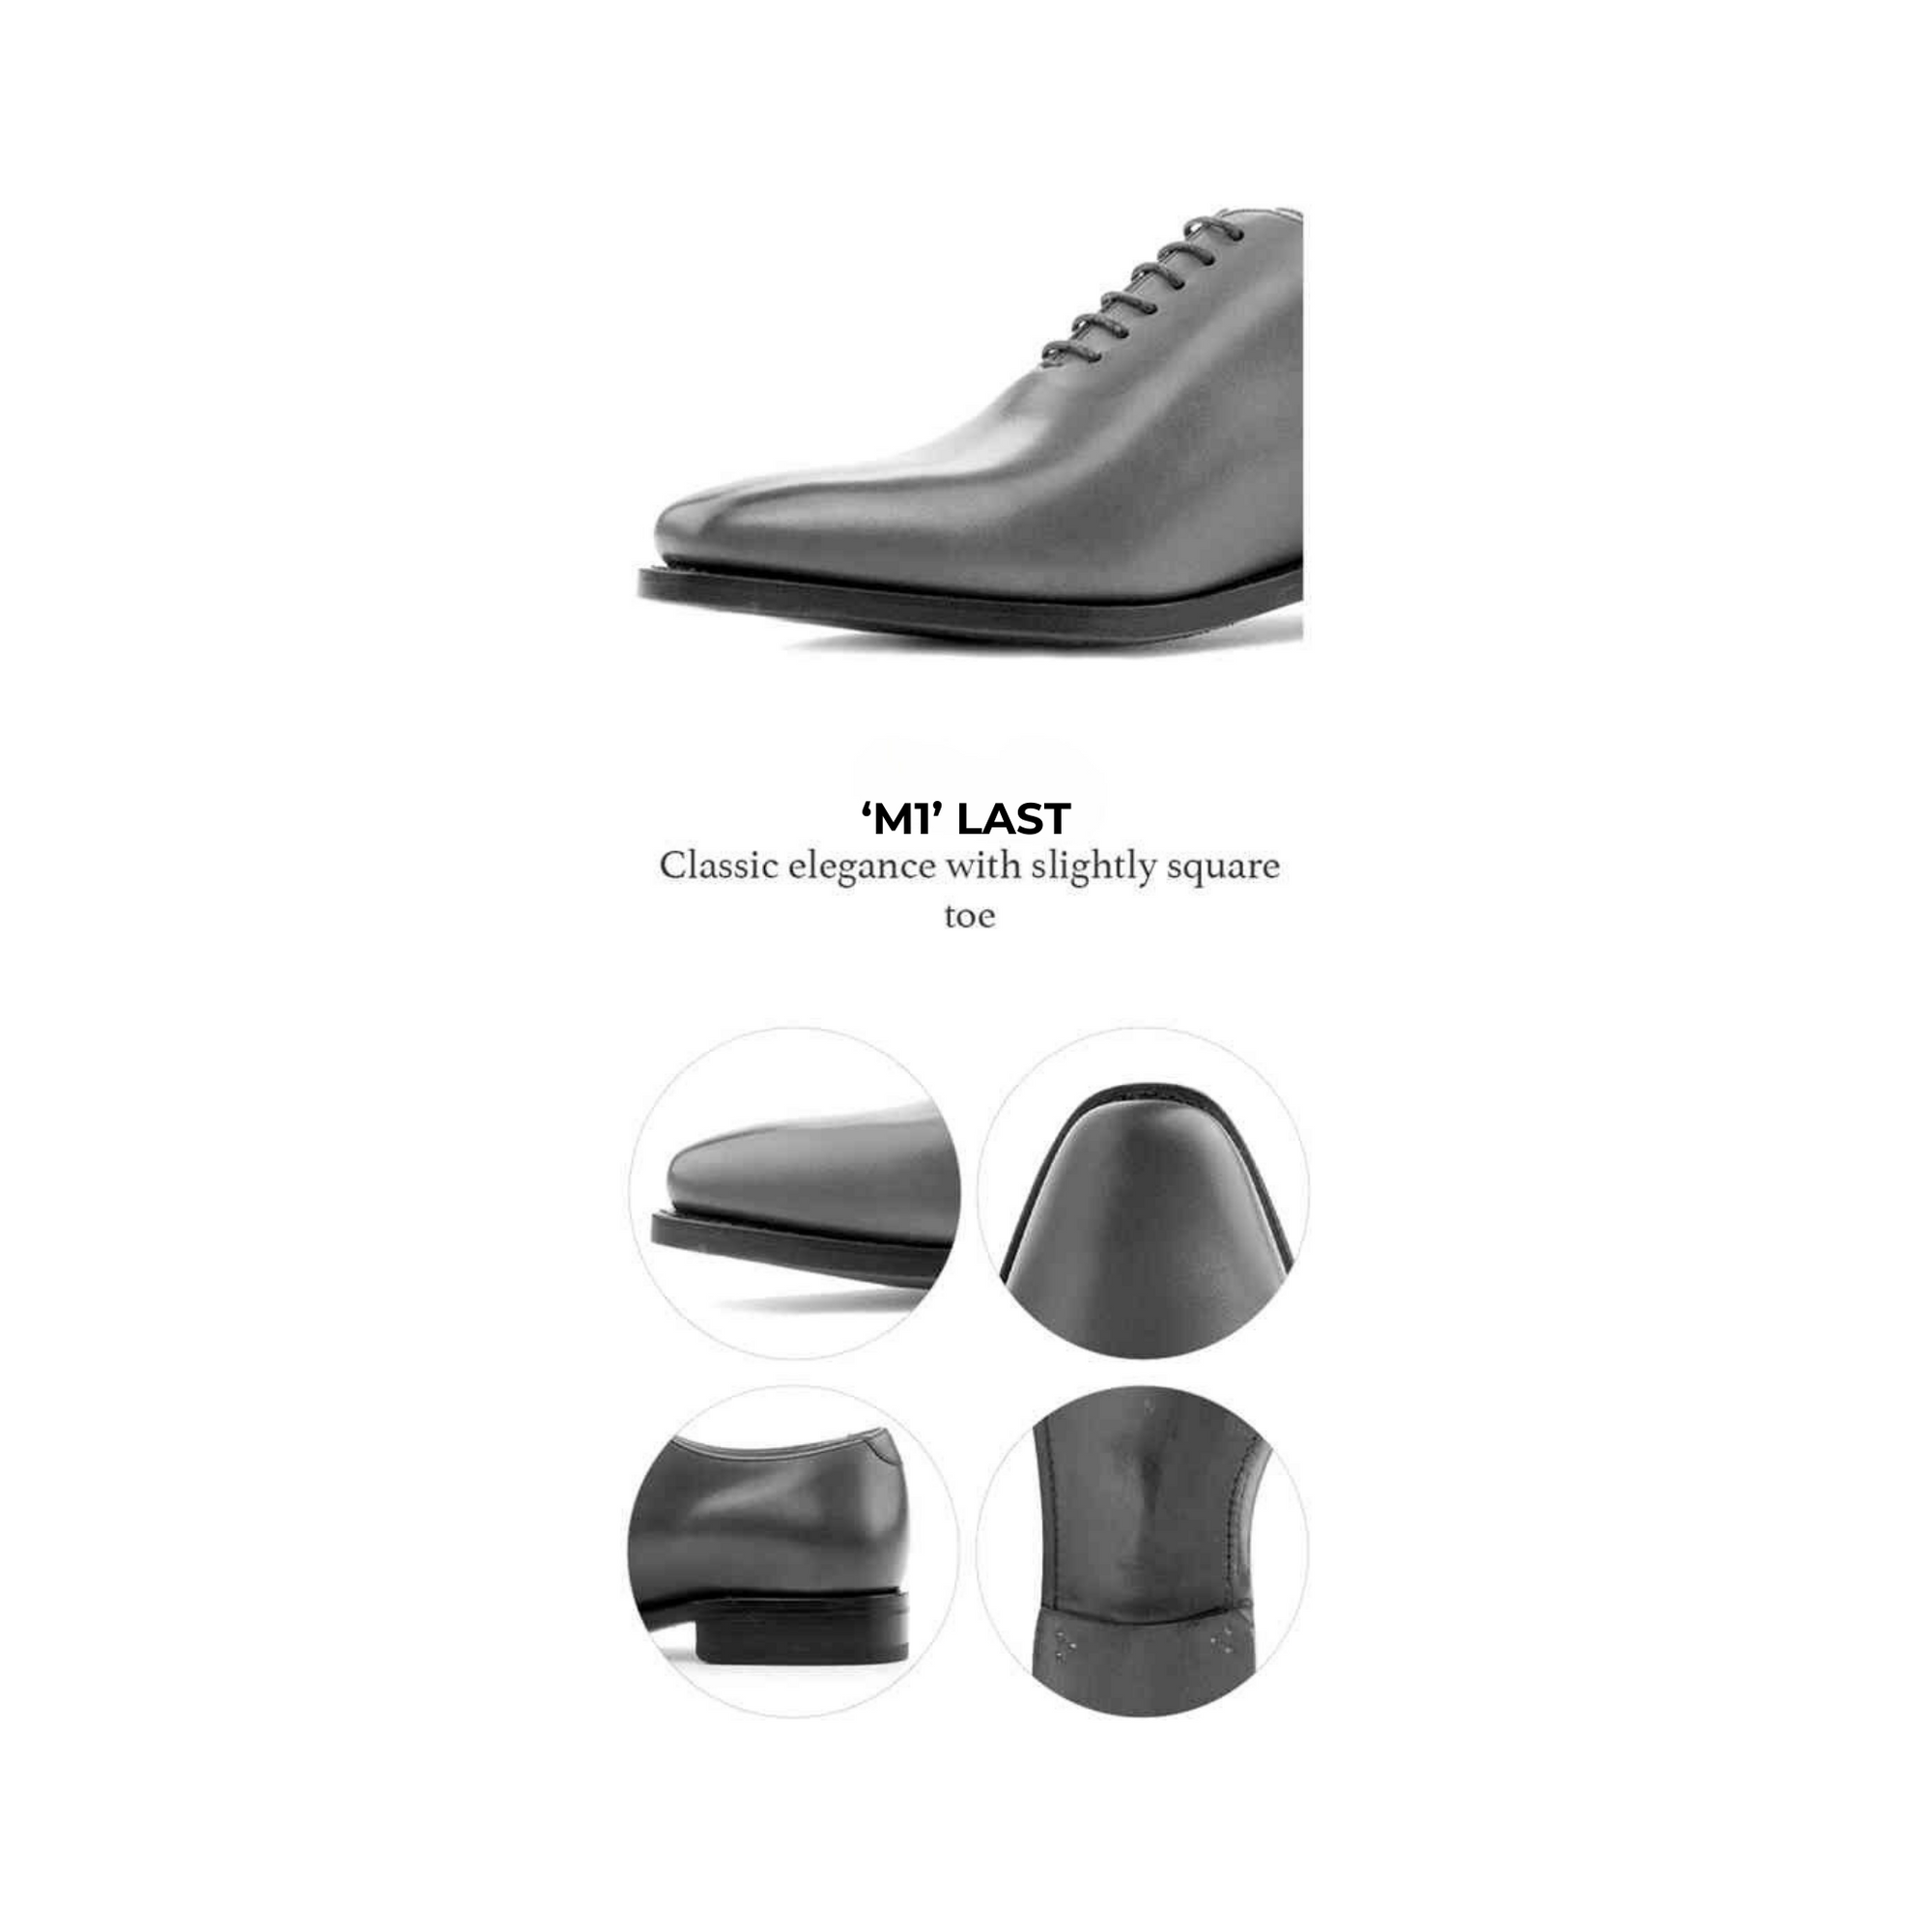 Comparison between our Z1 and M1 Mens Dress Shoe Last. Z1 is Traditional engliShoe is built on our Shoe Last M1 which is is classic slightly square Shoe last